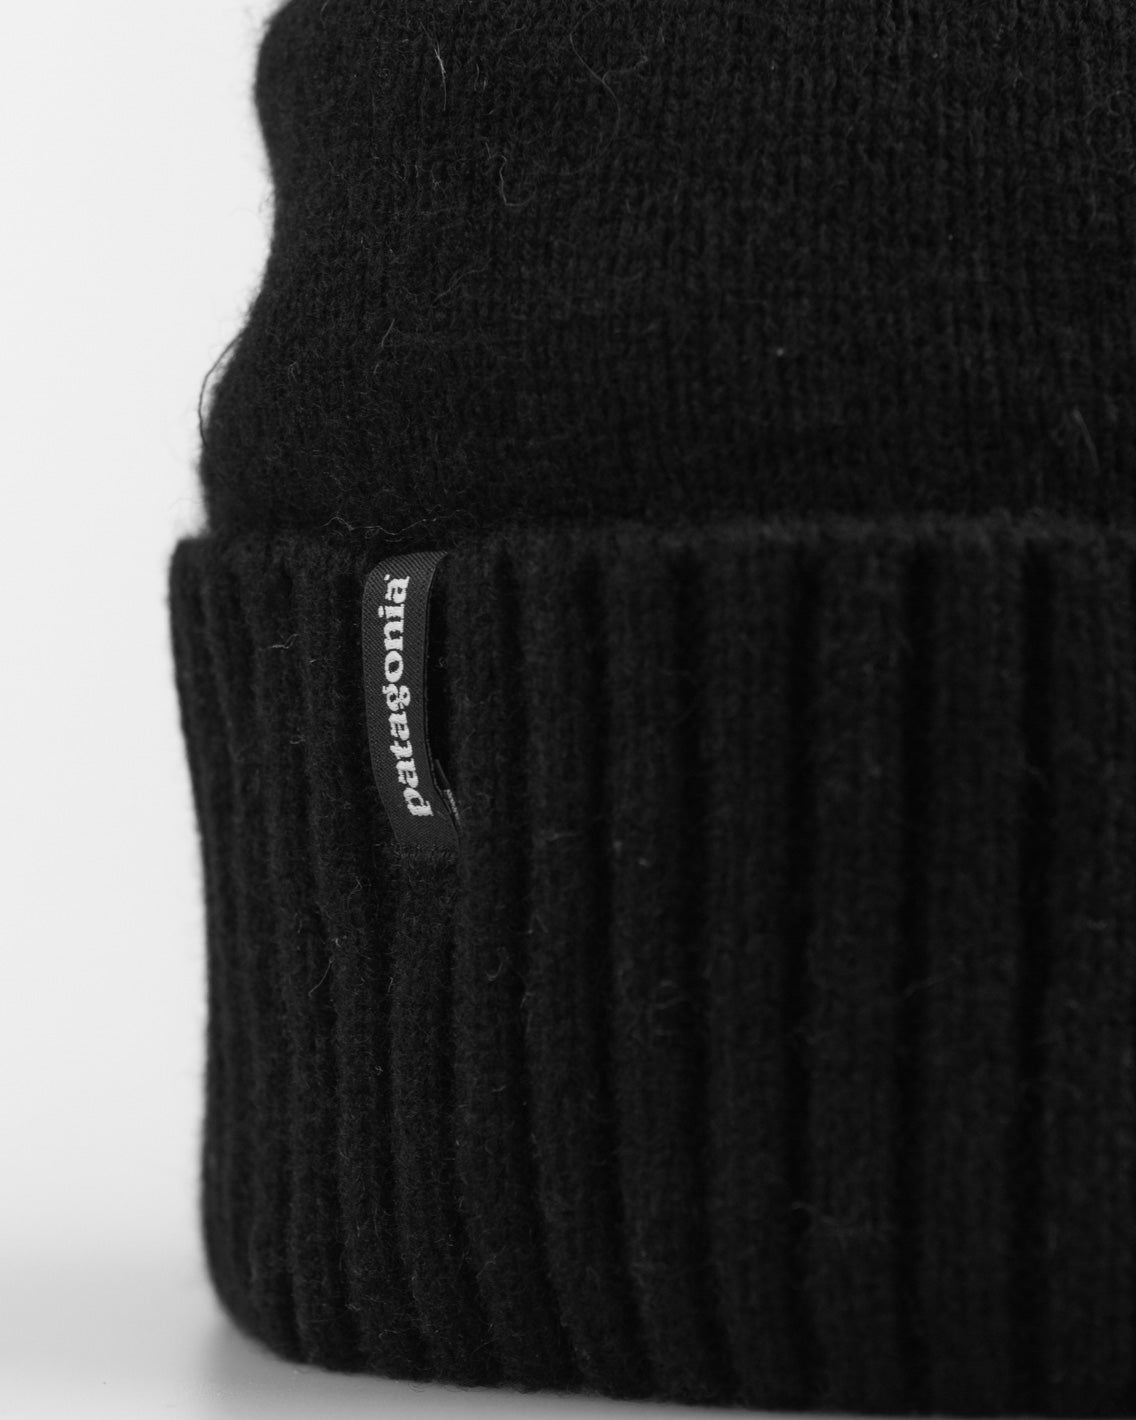 Constructed from warm and comfortable recycled wool, the Patagonia Brodeo Beanie in black is one of the most iconic beanies in the world. This black beanie is constructed from 95% recycled fabric and features a small cuff with the Patagonia woven label to sign off.